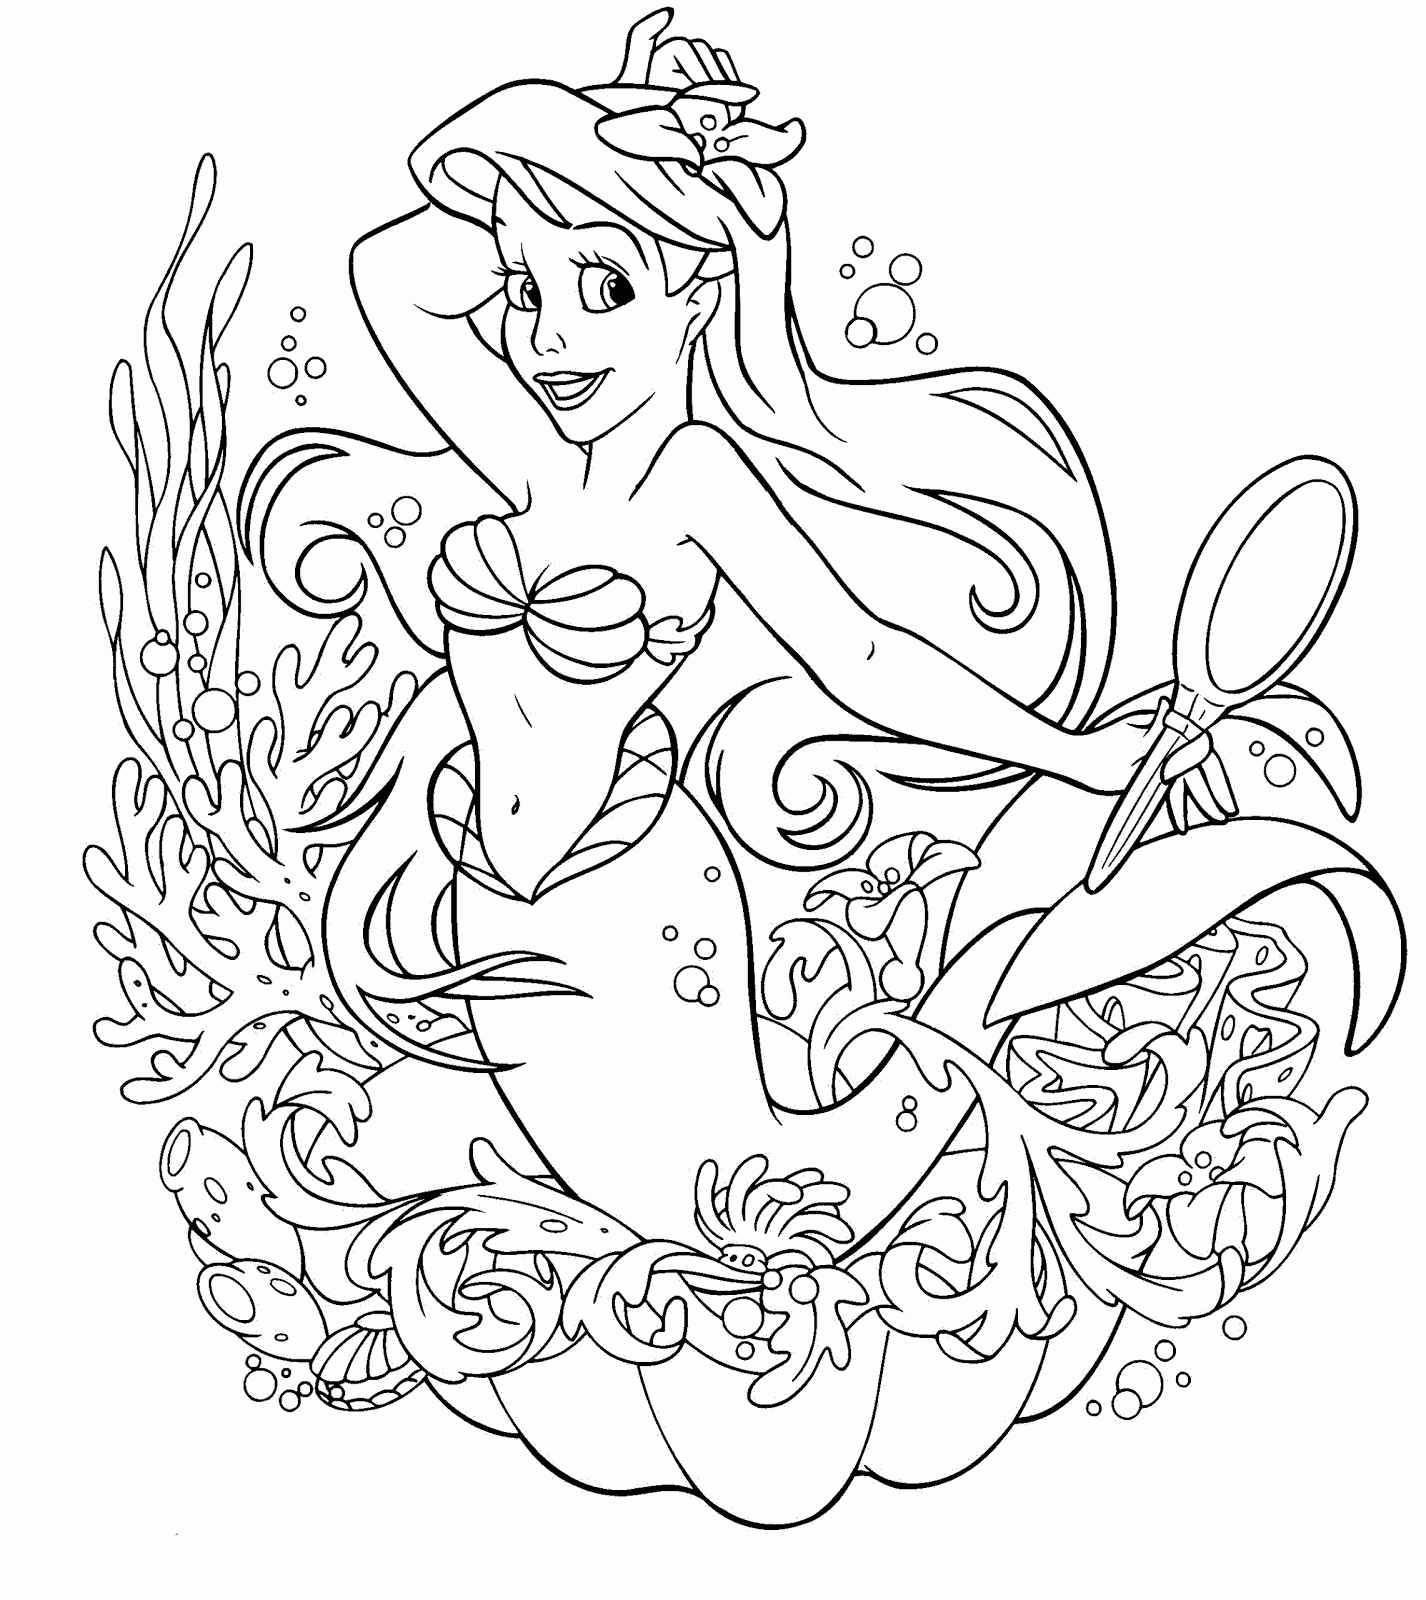 Ariel the Little Mermaid Coloring Pages Cartoons Princess Ariel Sheets for Girls Printable 2020 0604 Coloring4free